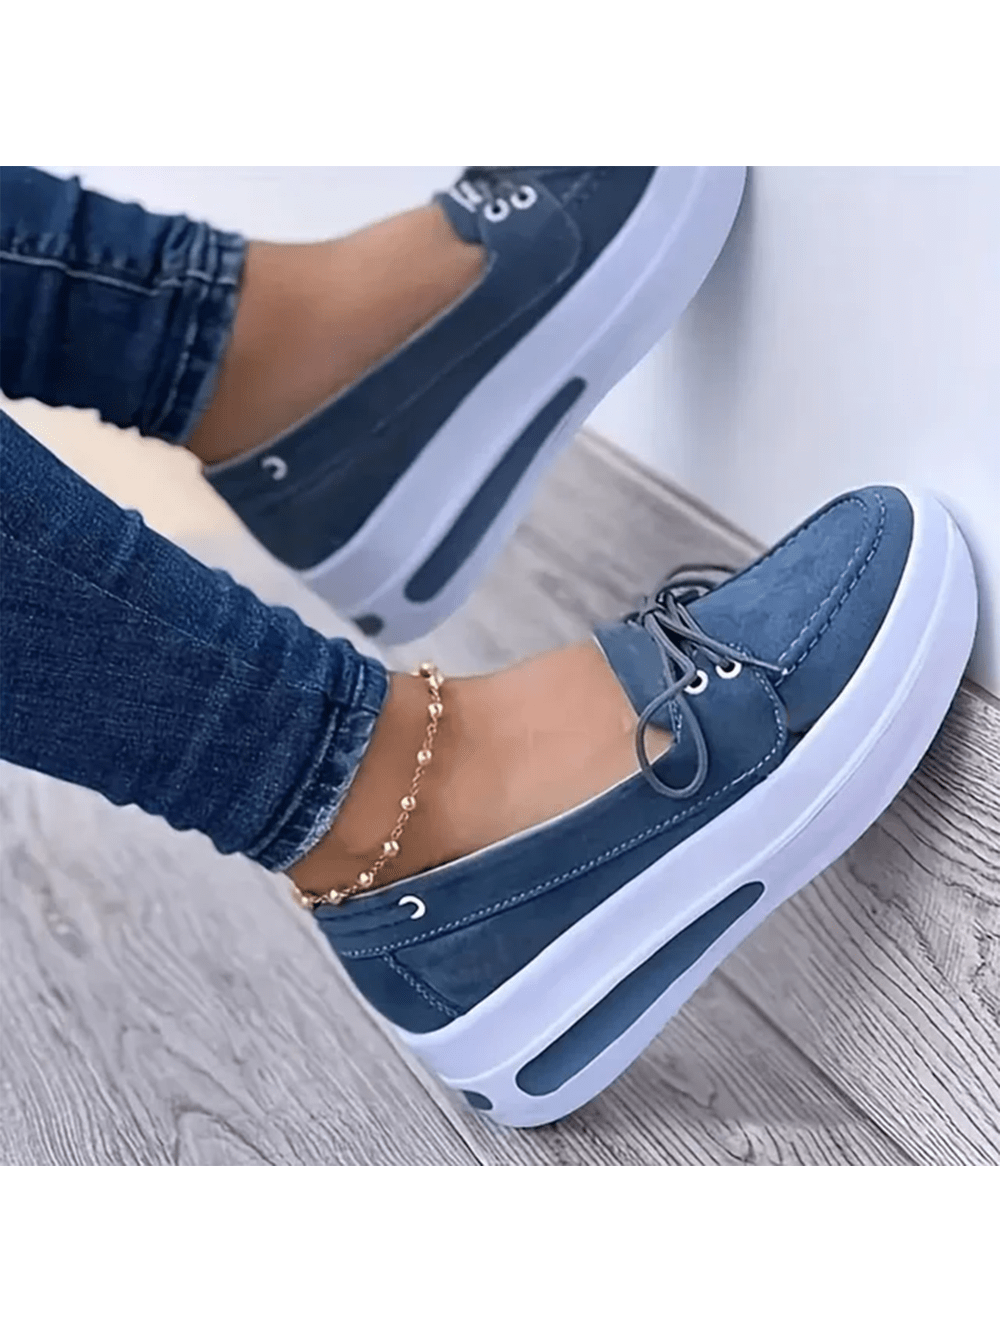 Women Block Shoes Slip On Closed Toe Platform Flat Wedge Casual Lace Up Sneakers-Blue-1